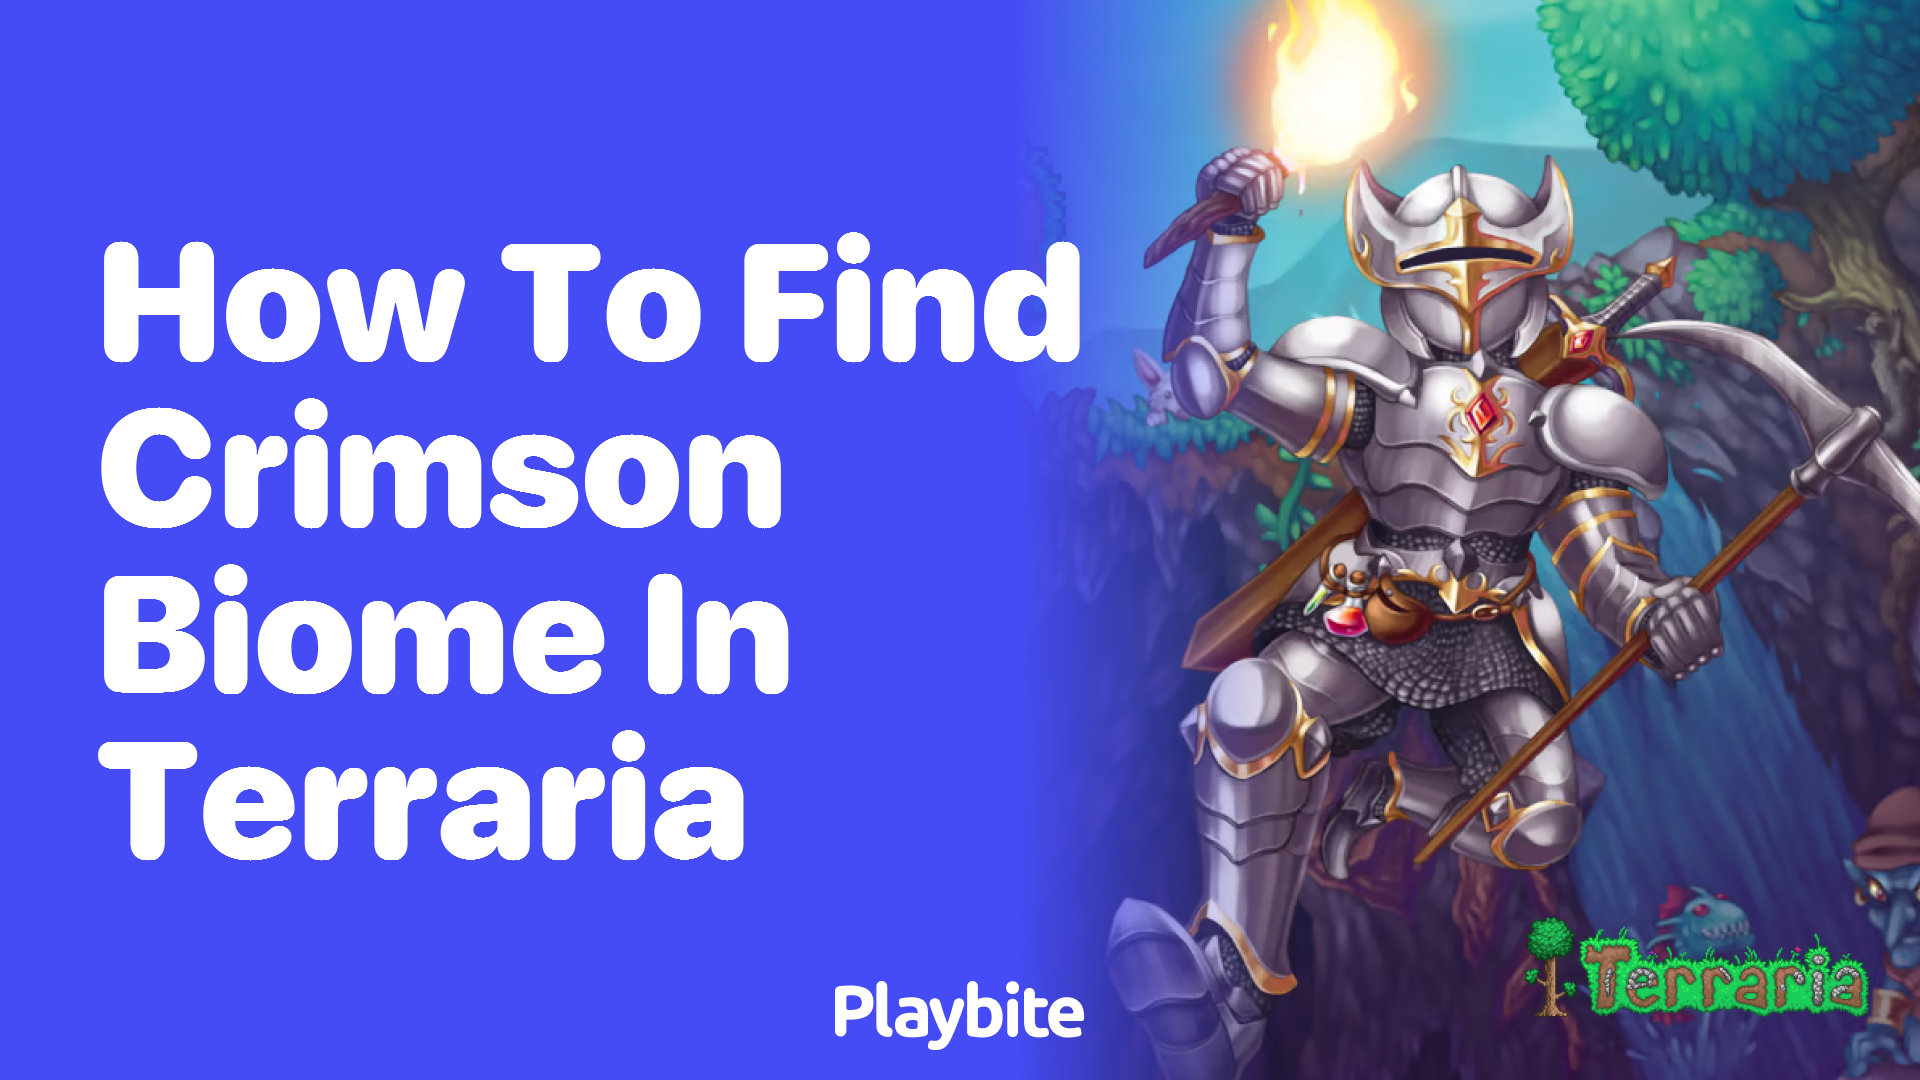 How to find the Crimson Biome in Terraria